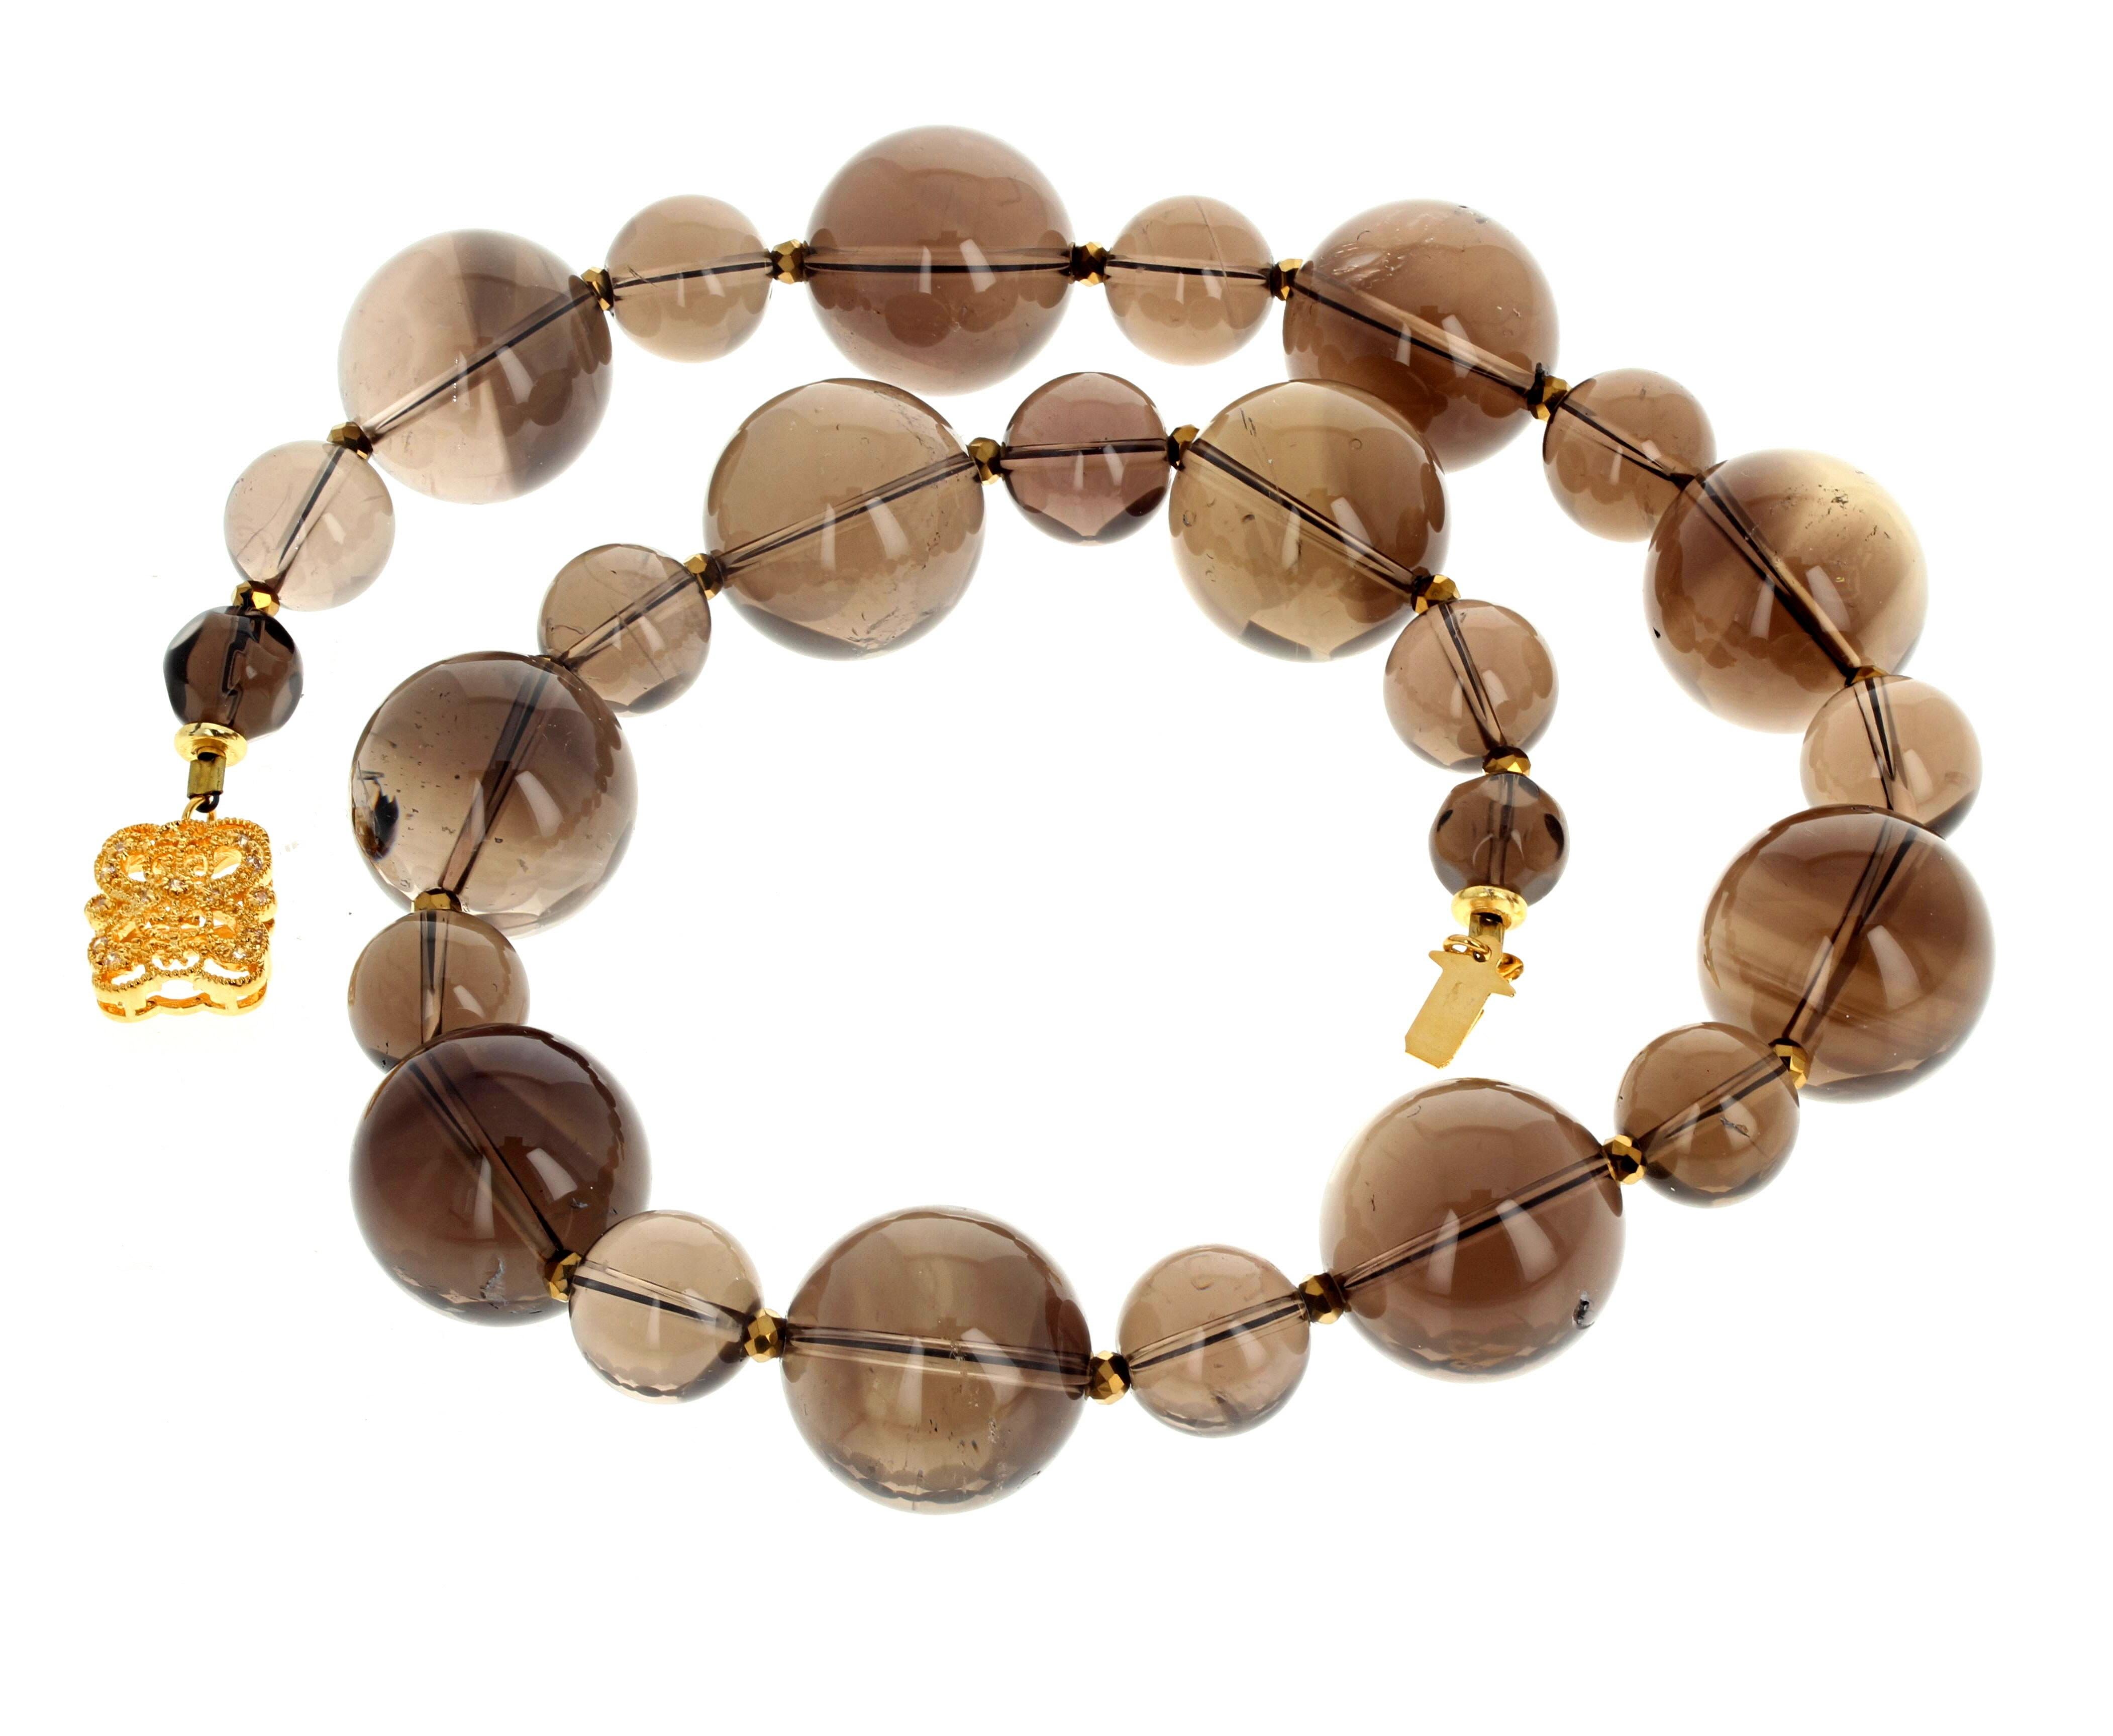 Fascinating large natural real Smoky Quartz - the largest approximately 20MM and the smaller ones approximately 13mm - in the beautiful 18 inch long necklace.  The clasp is an easy to use gold plated slide-in clasp.  